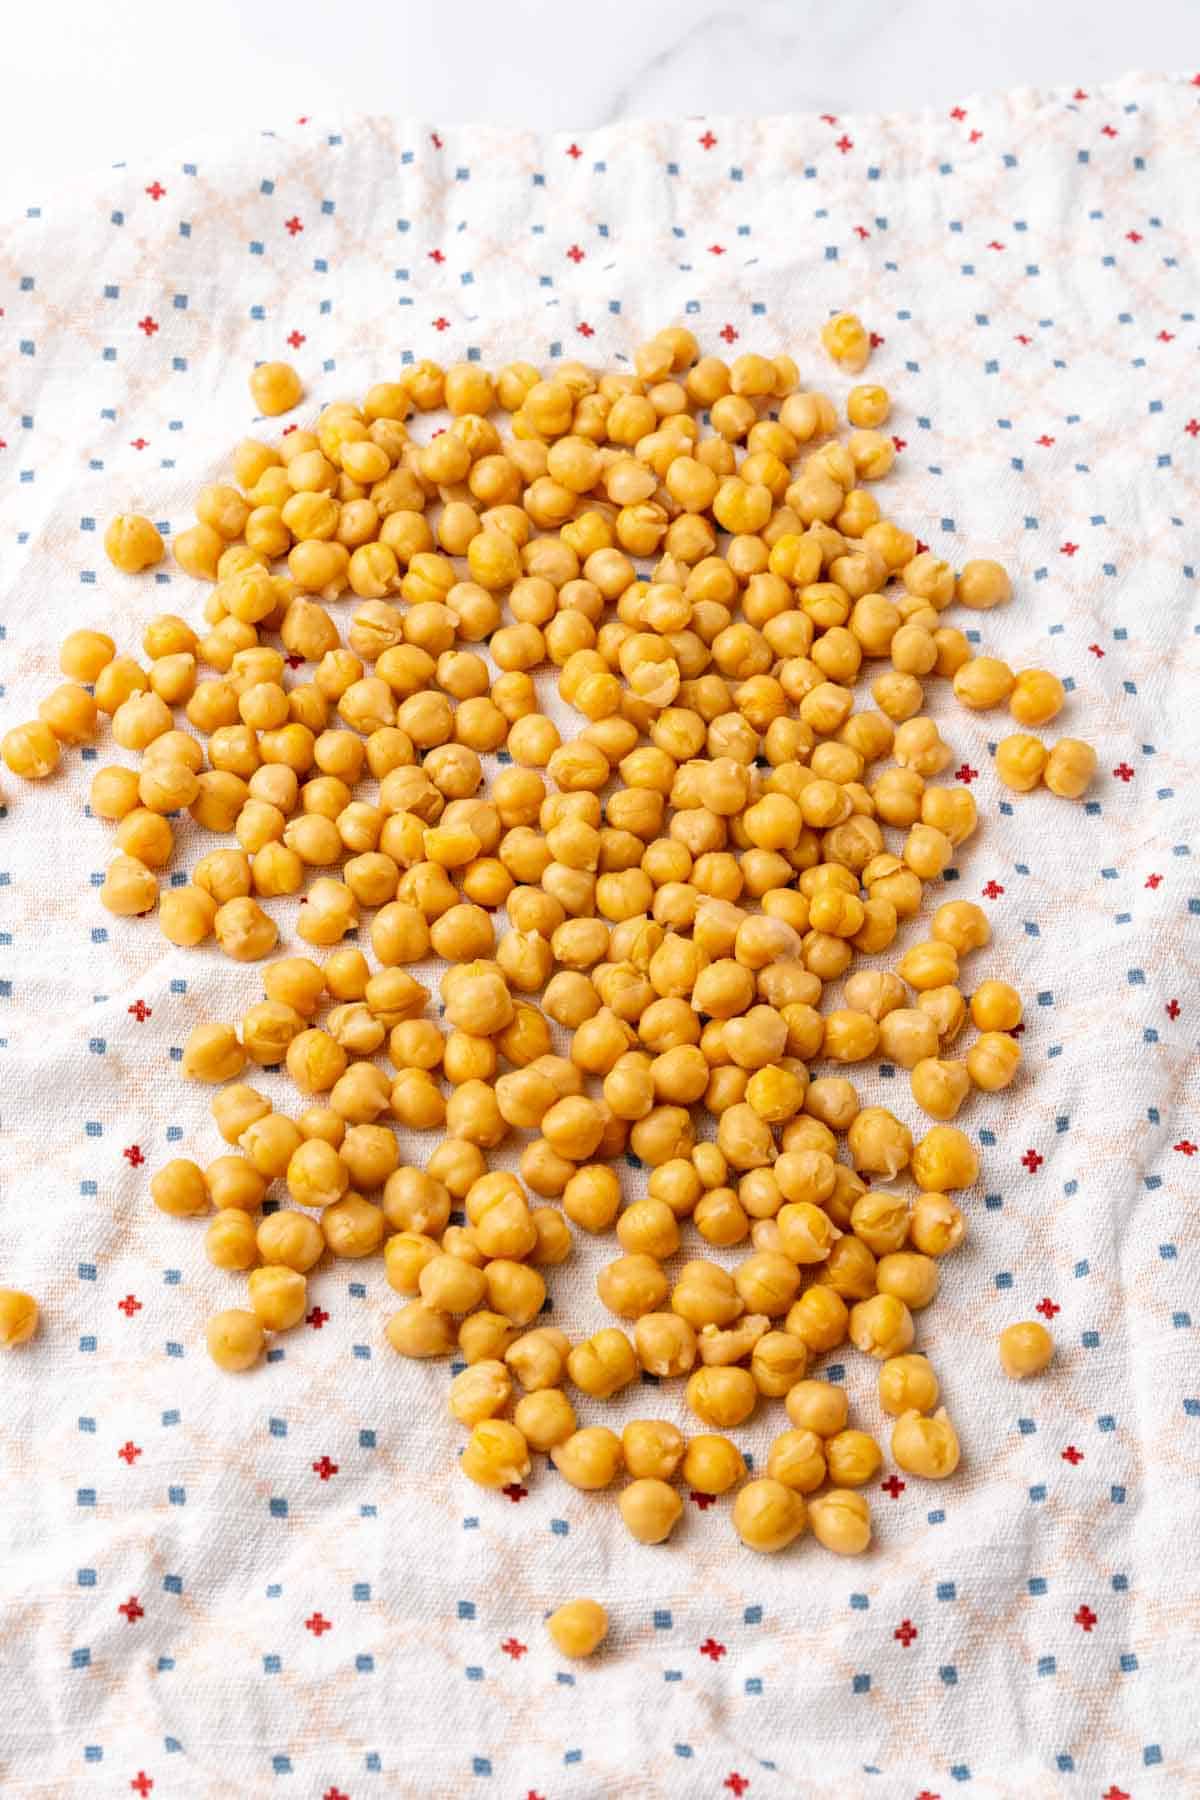 Chickpeas laid out on a cloth napkin to dry